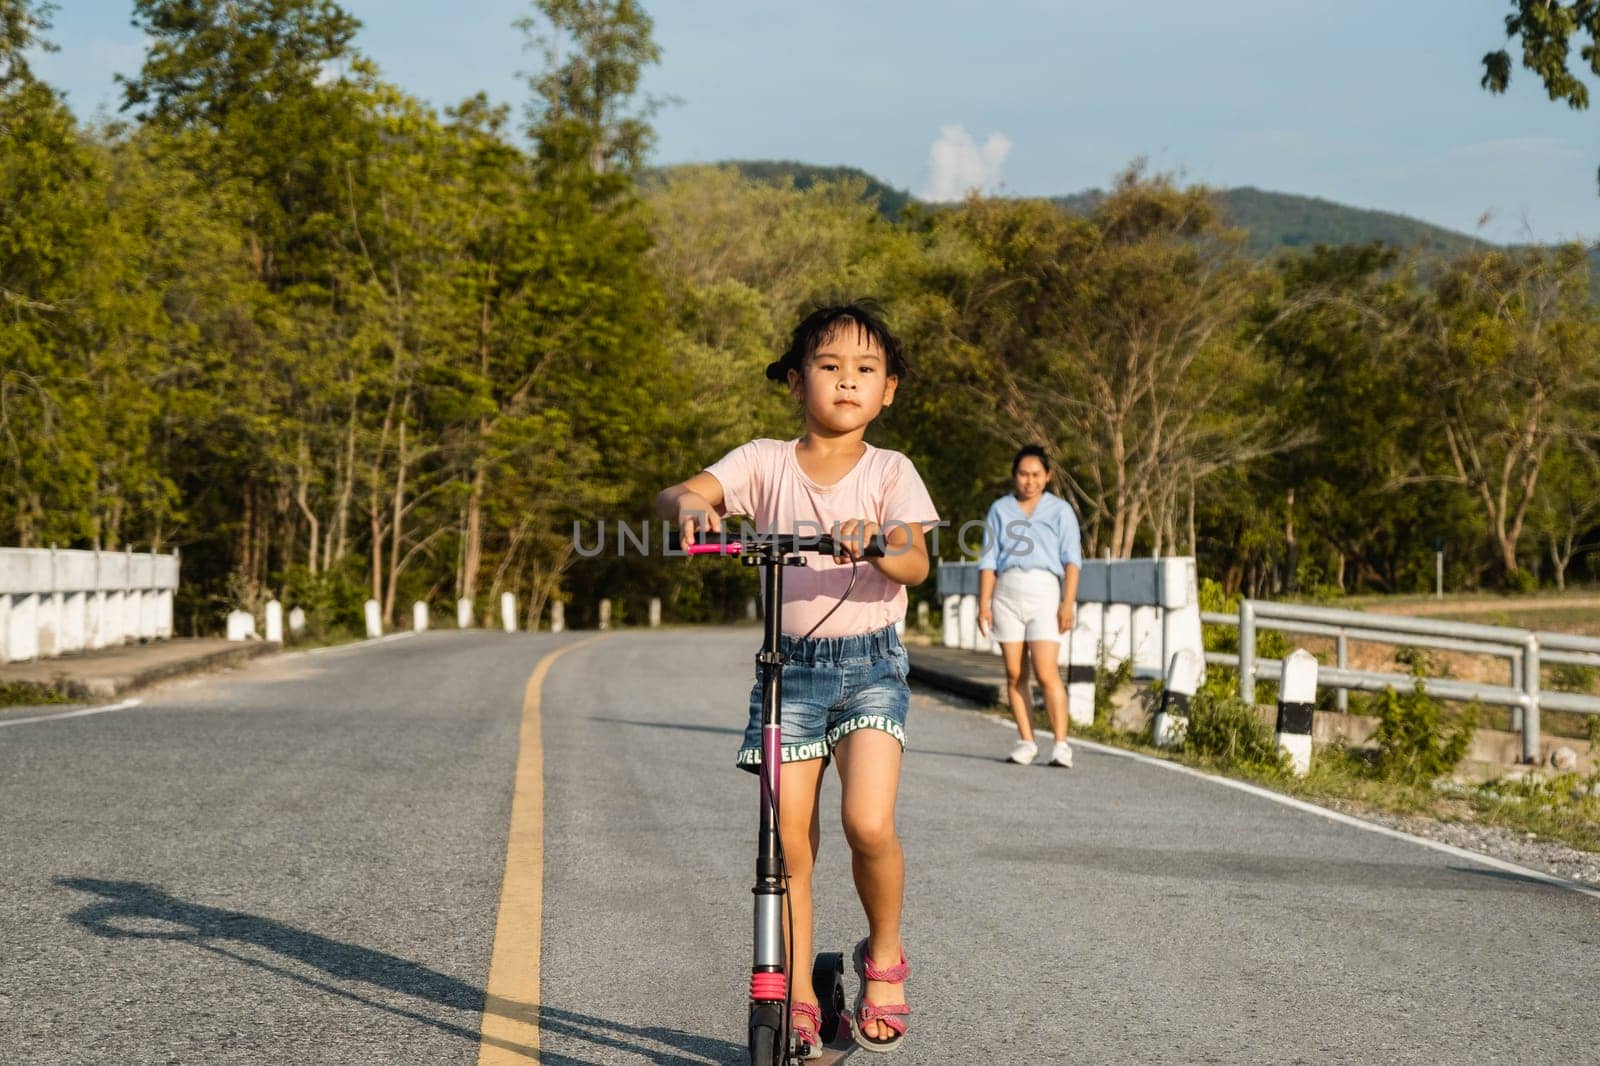 Cute little girl riding scooter on road in outdoor park. Healthy sports and outdoor activities for school children in the summer. by TEERASAK